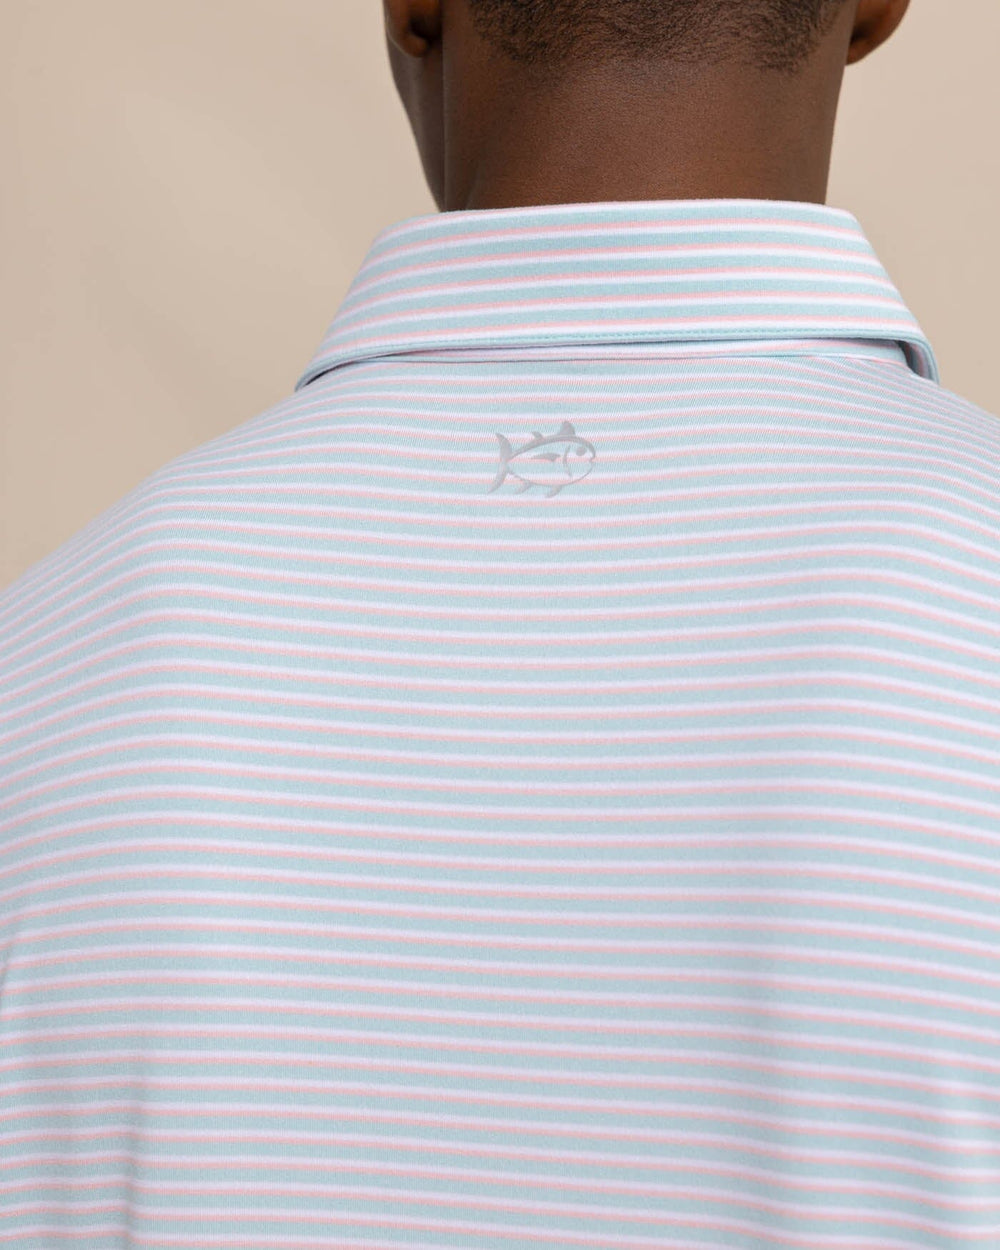 The detail view of the Southern Tide Ryder Heather Halls Performance Polo by Southern Tide - Heather Wake Blue